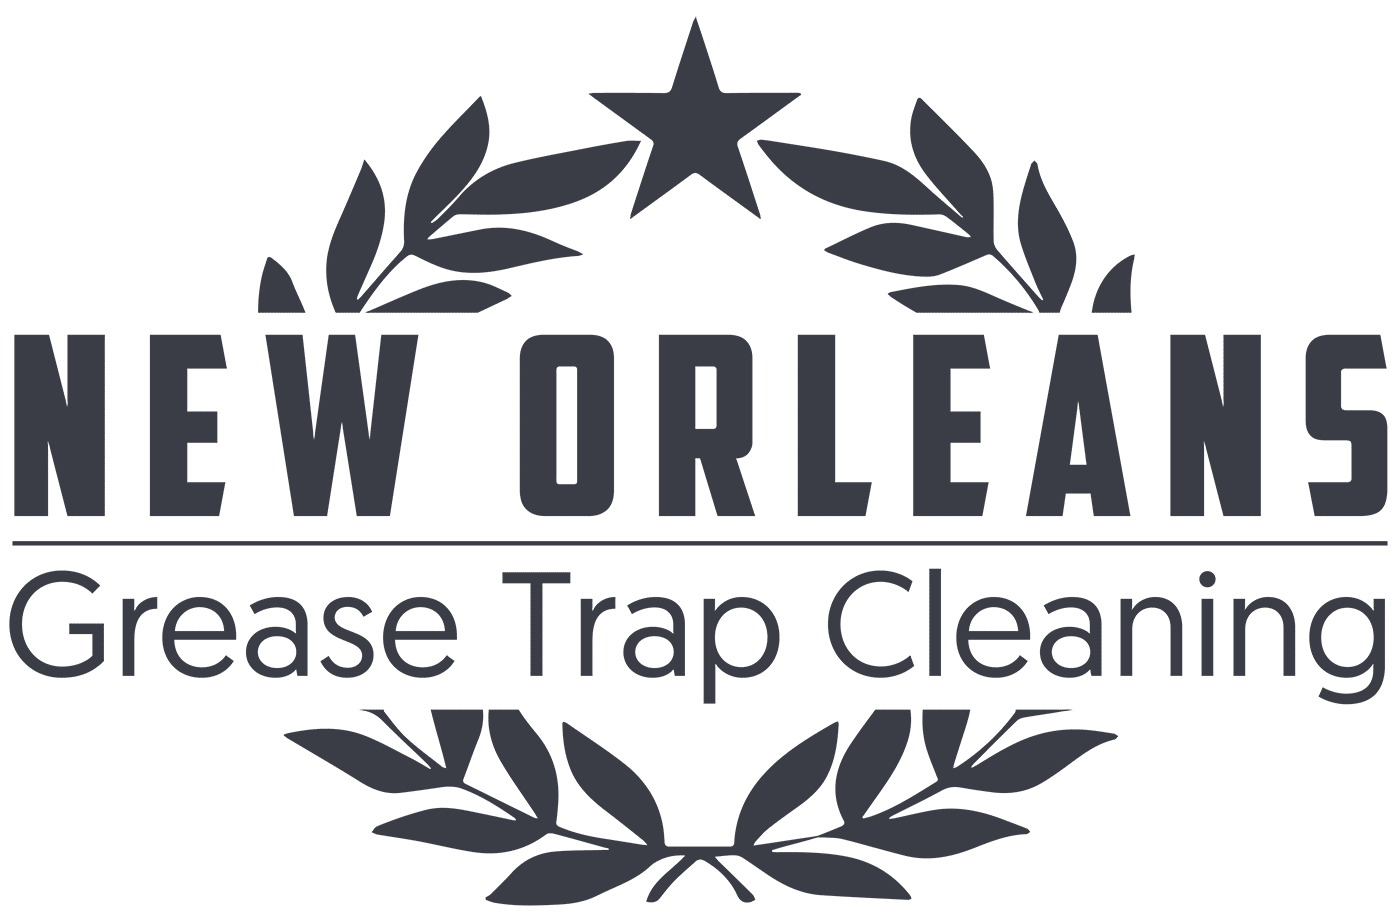 New Orleans Grease Trap Cleaning and Cooking Oil Recycling